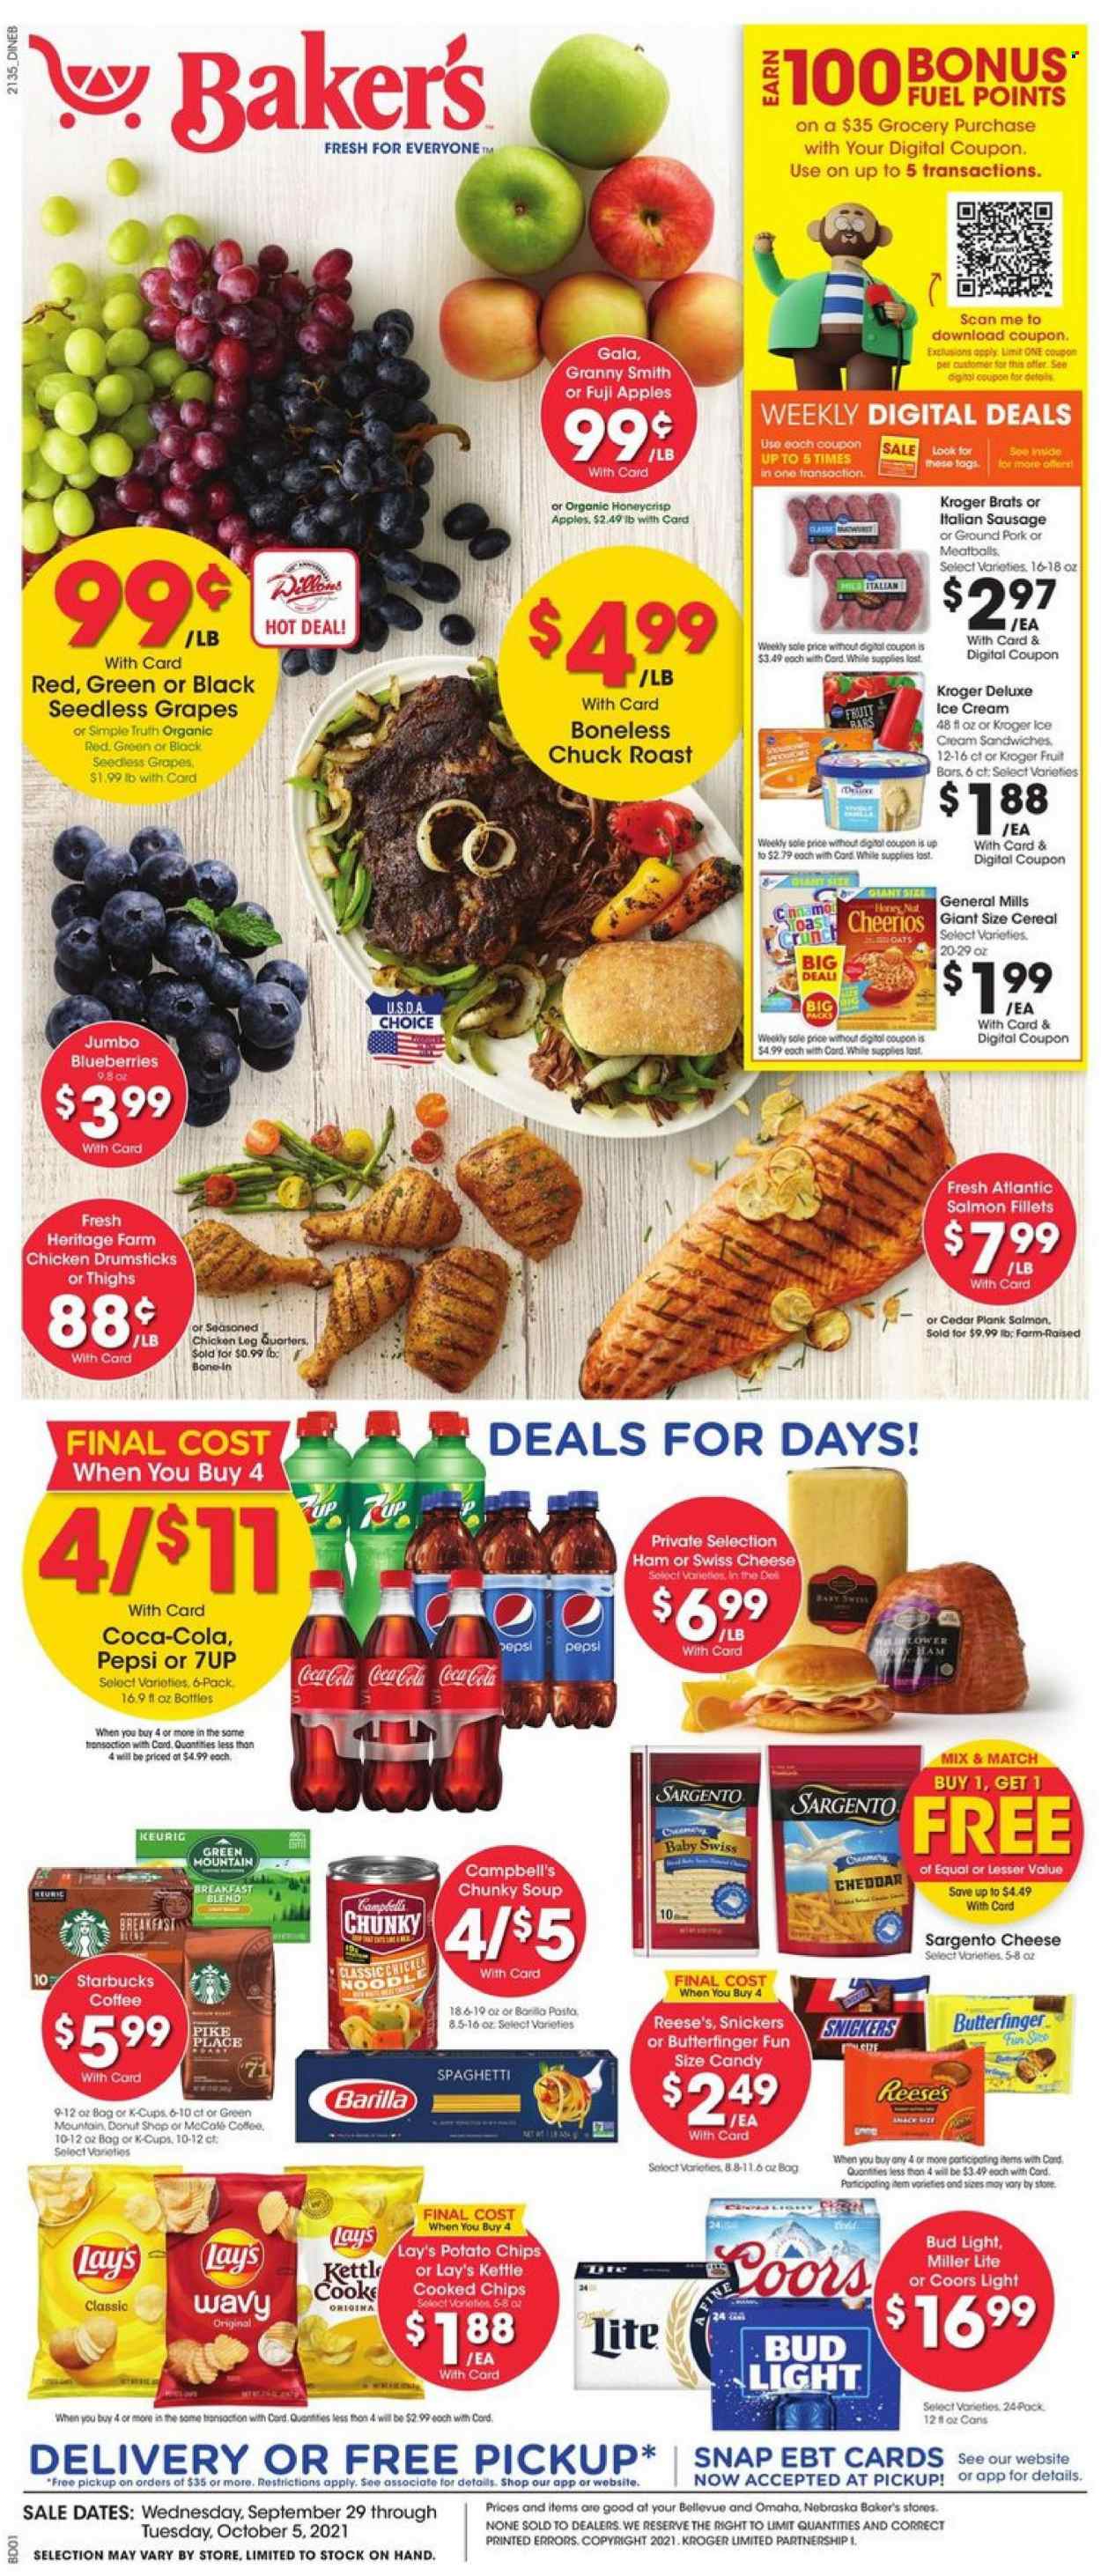 thumbnail - Baker's Flyer - 09/29/2021 - 10/05/2021 - Sales products - seedless grapes, apples, blueberries, Gala, grapes, Fuji apple, Granny Smith, salmon, salmon fillet, Campbell's, spaghetti, meatballs, soup, pasta, Barilla, noodles, ham, sausage, italian sausage, swiss cheese, cheese, Sargento, ice cream, ice cream sandwich, Reese's, Snickers, potato chips, chips, Lay’s, cereals, Cheerios, Coca-Cola, Pepsi, 7UP, coffee, Starbucks, coffee capsules, L'Or, K-Cups, Keurig, Green Mountain, wine, beer, Bud Light, chicken drumsticks, beef meat, chuck roast, ground pork, Miller Lite, Coors. Page 1.